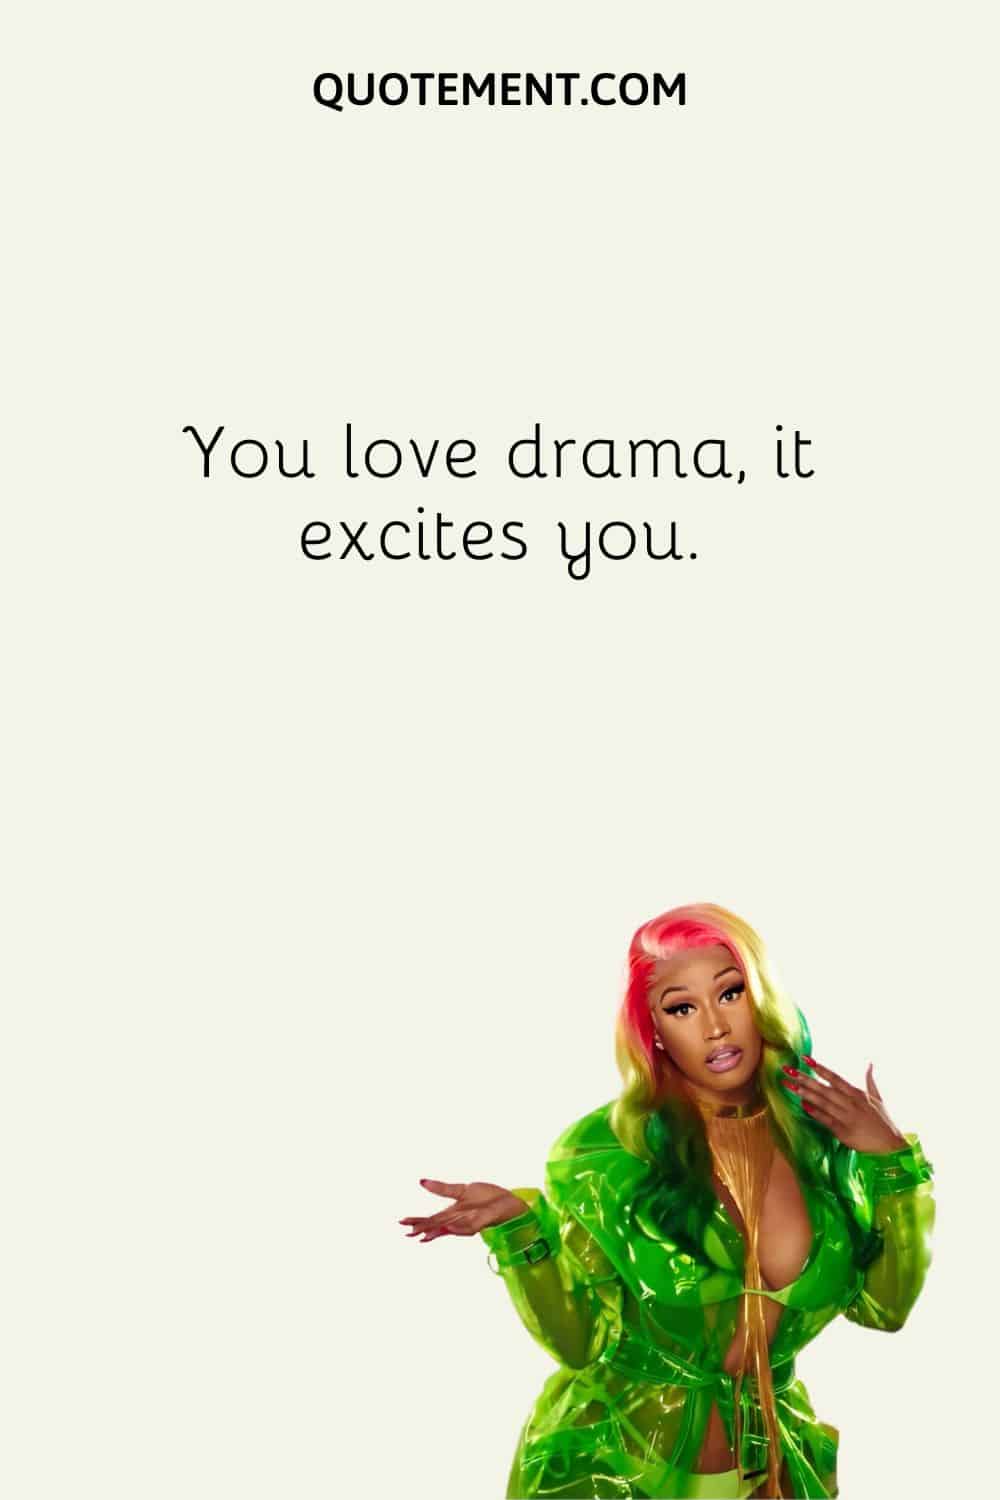 You love drama, it excites you